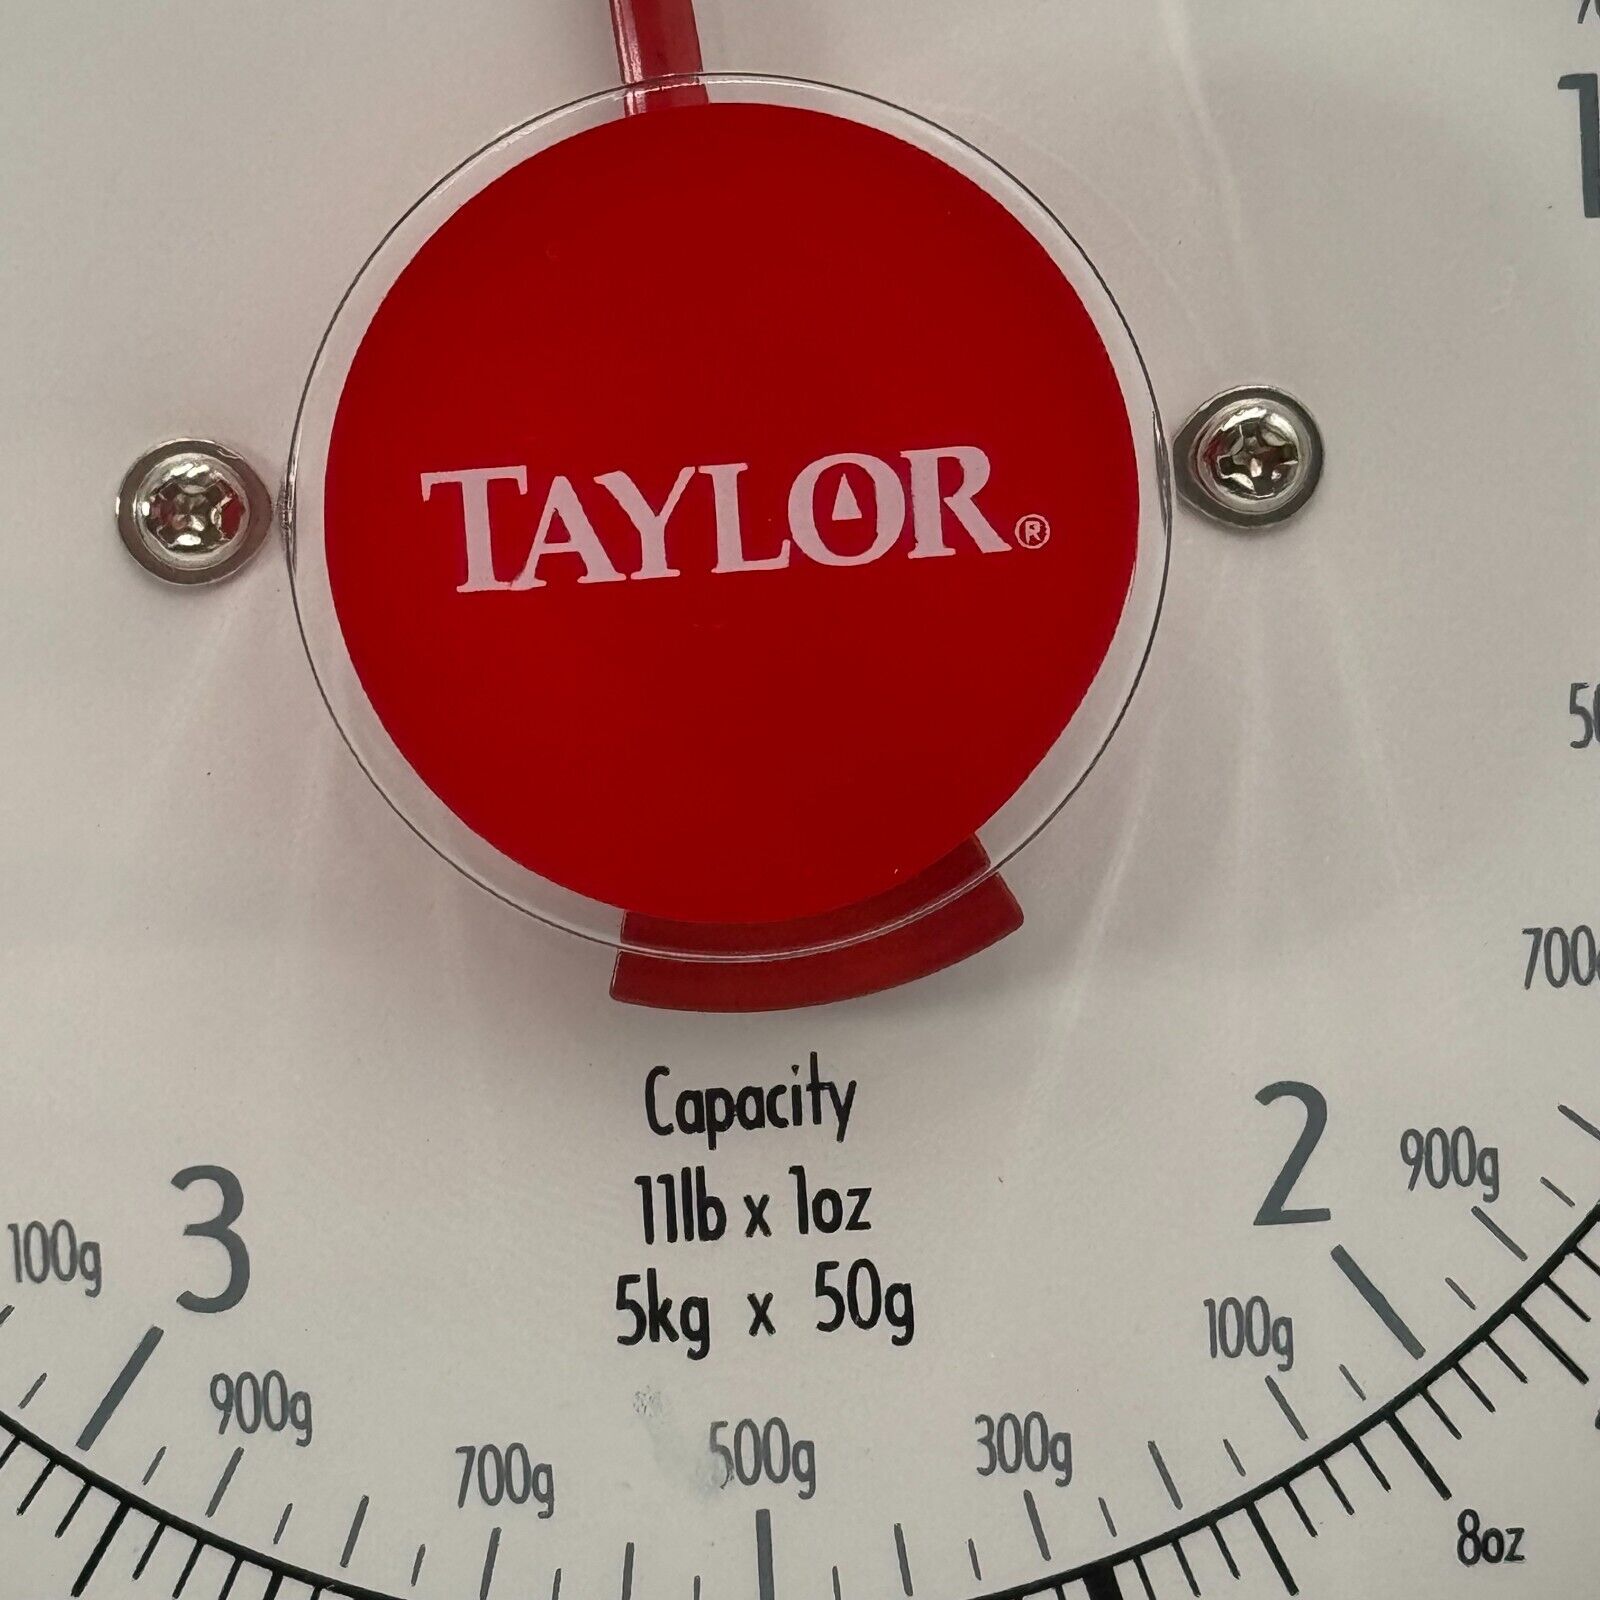 Taylor Scale Weighs up to 11 lbs Measures in Grams and Ounces Mechanical Retro